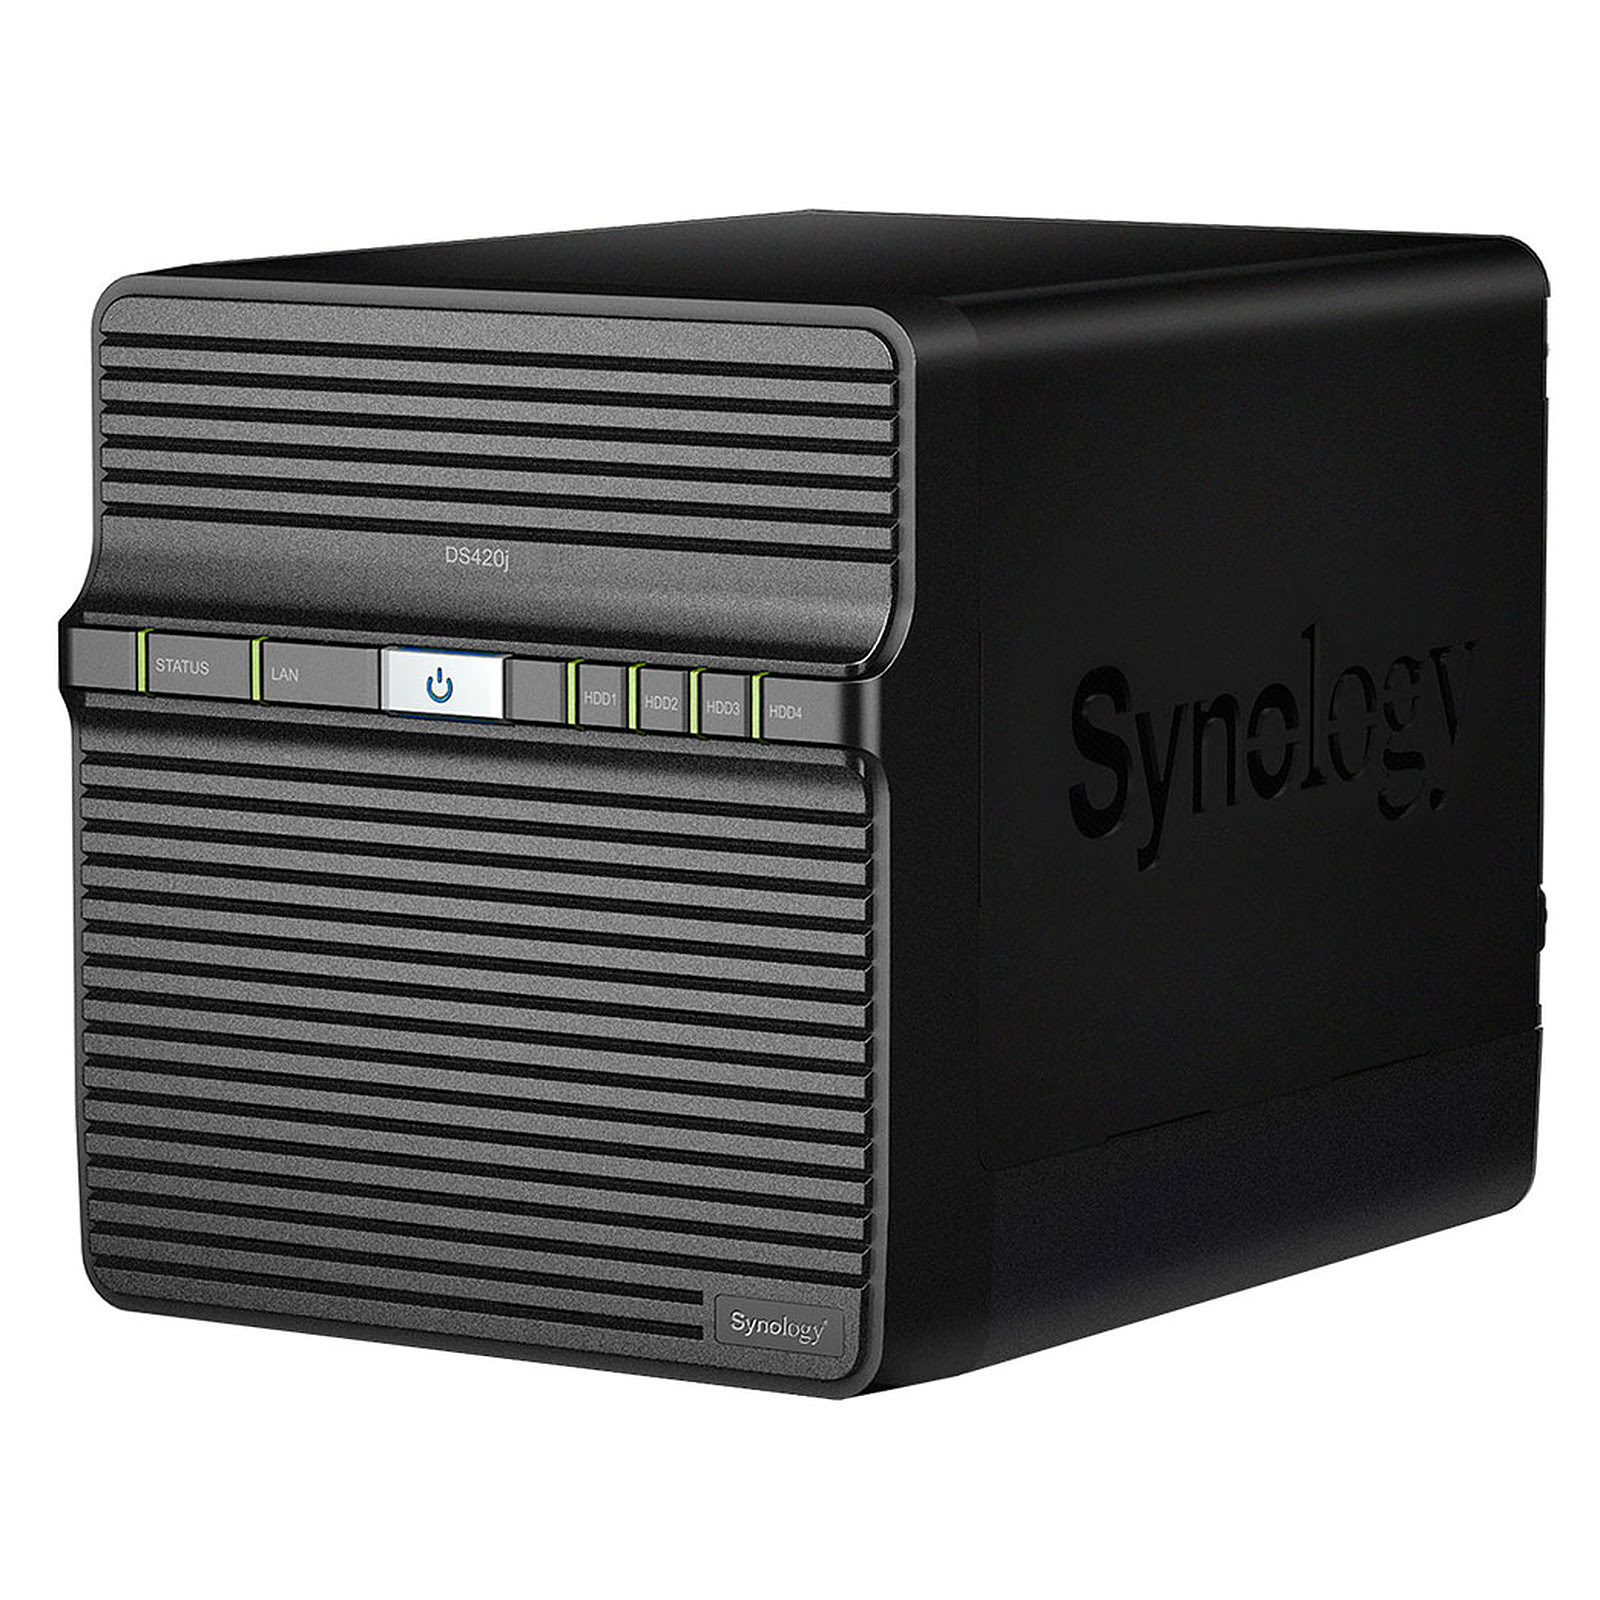 Synology DS420J - 4 Baies - Serveur NAS Synology - grosbill-pro.com - 3